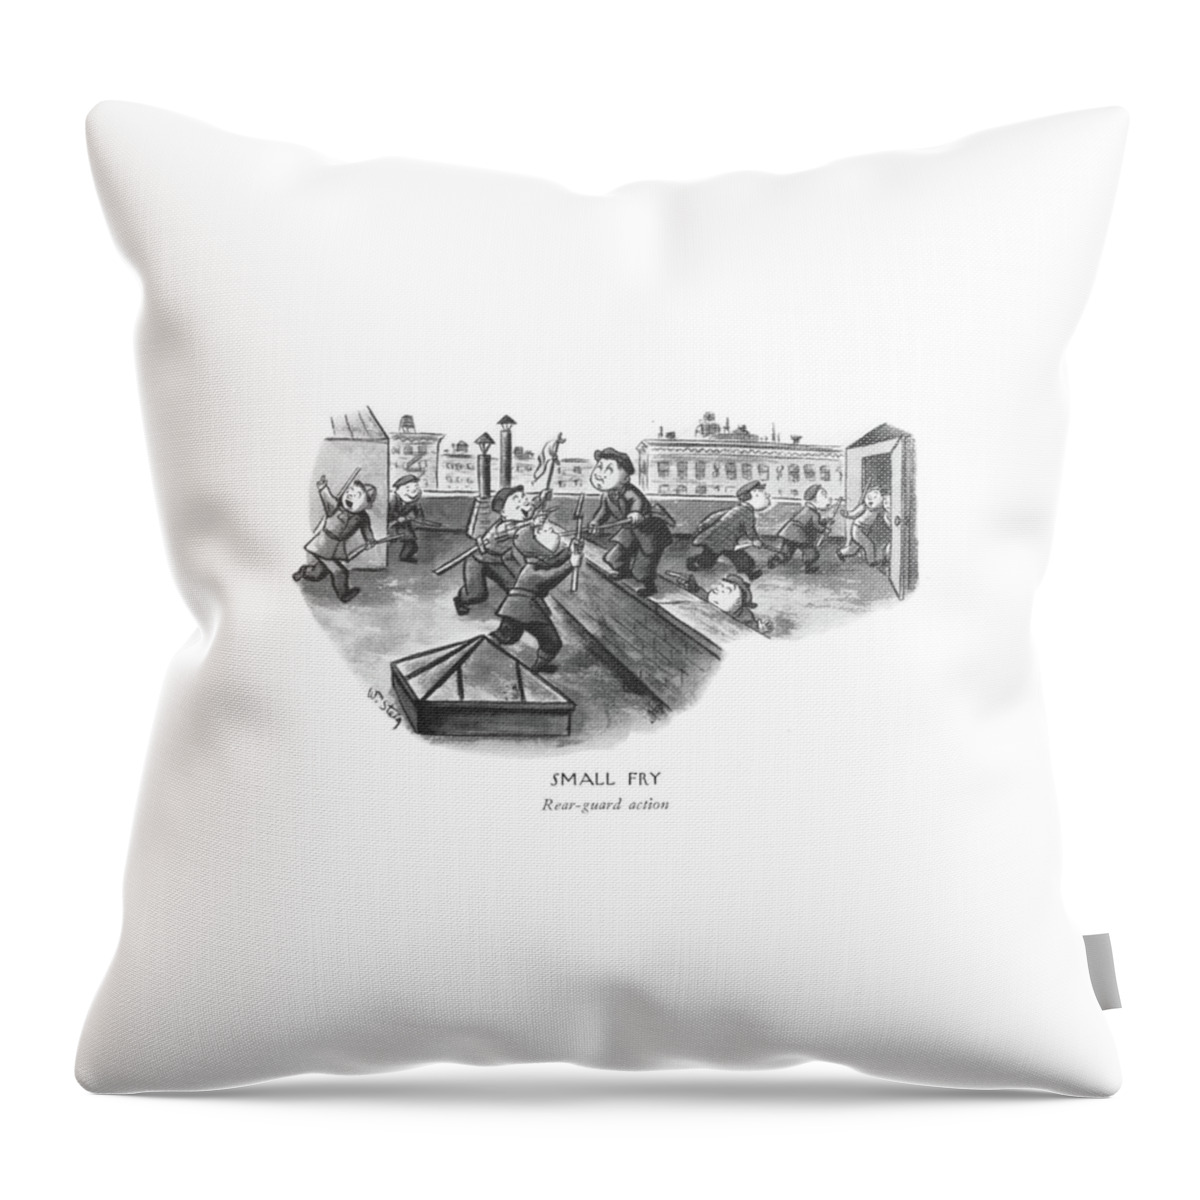 Small Fry
Rear-guard Action Throw Pillow